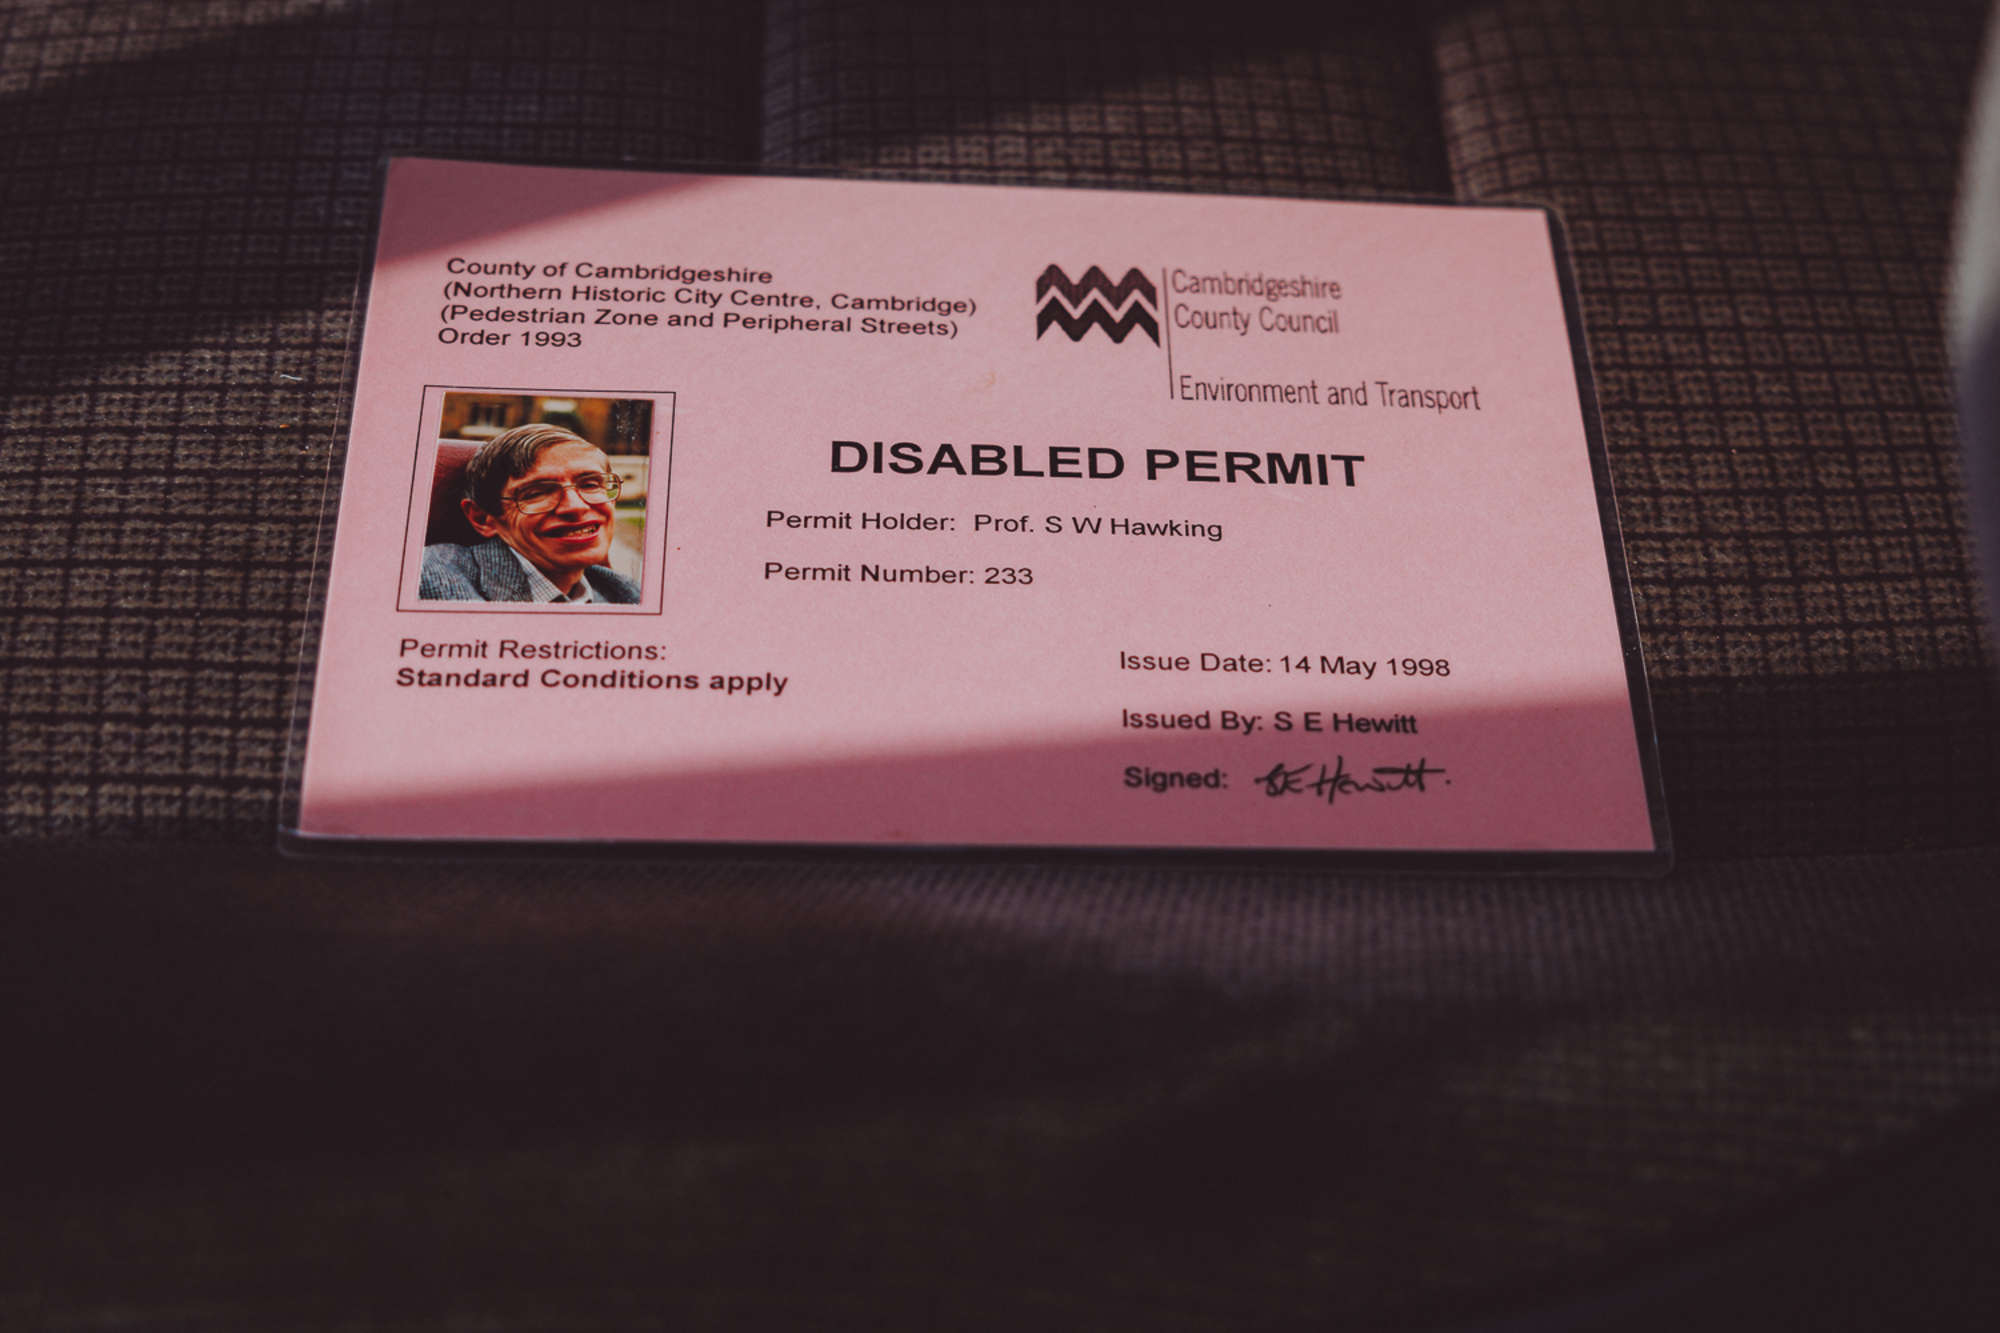 INCREDIBLE pictures show Stephen Hawking’s minivan and disabled parking permit in front of Hawking’s College at Cambridge - which are now up for sale.